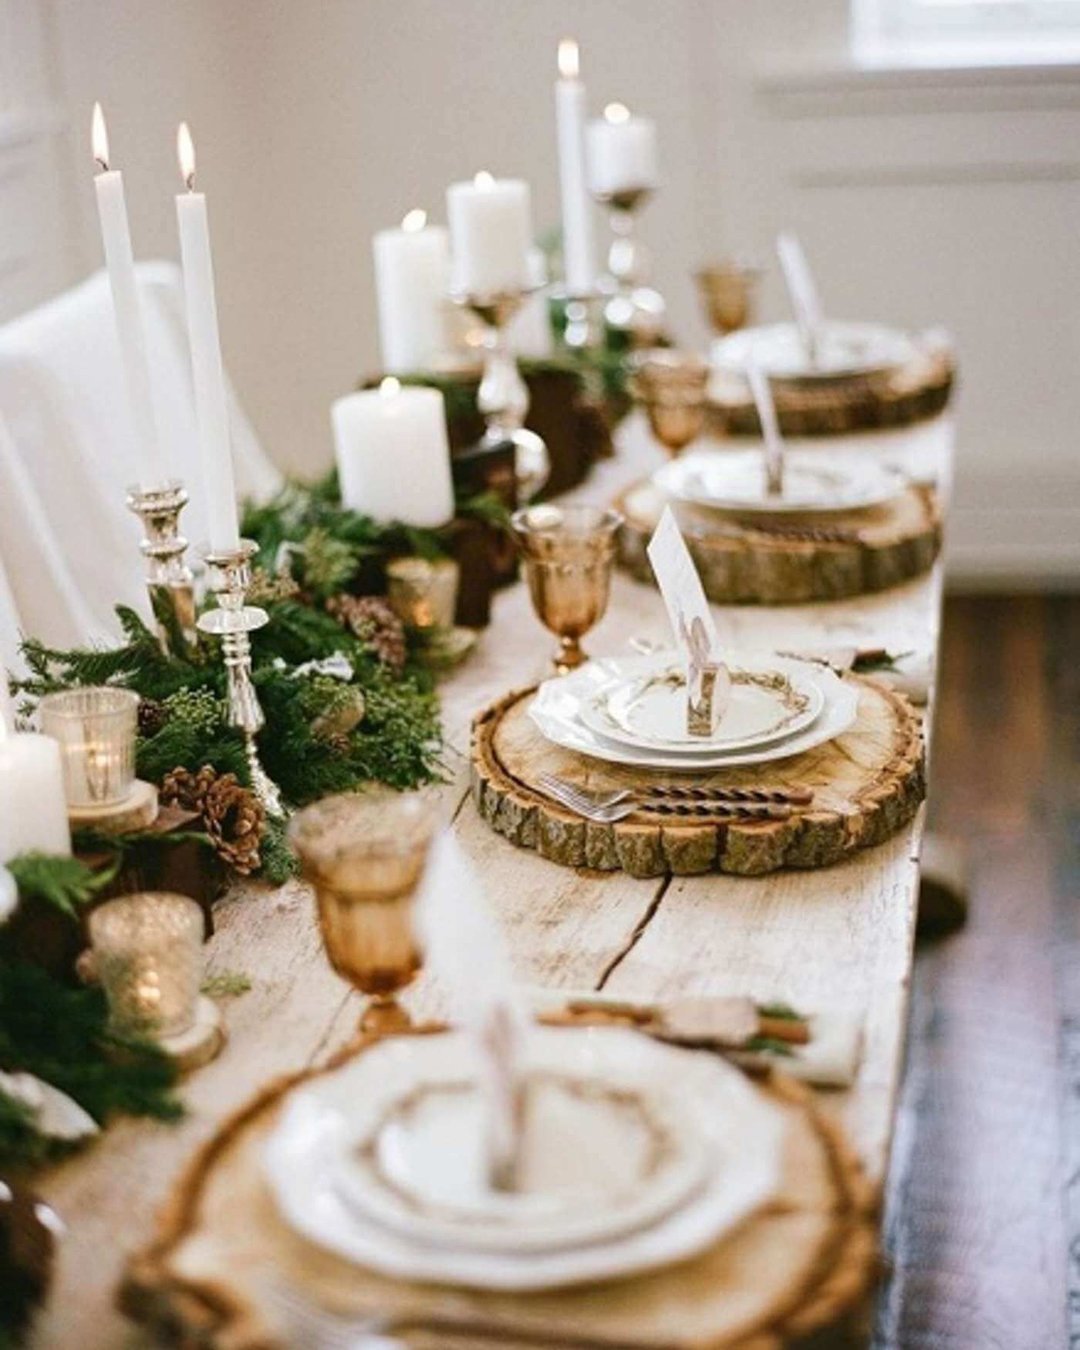 winter wedding decorations a long wooden table decorated with fir tree branches with cones and candles plates on wooden